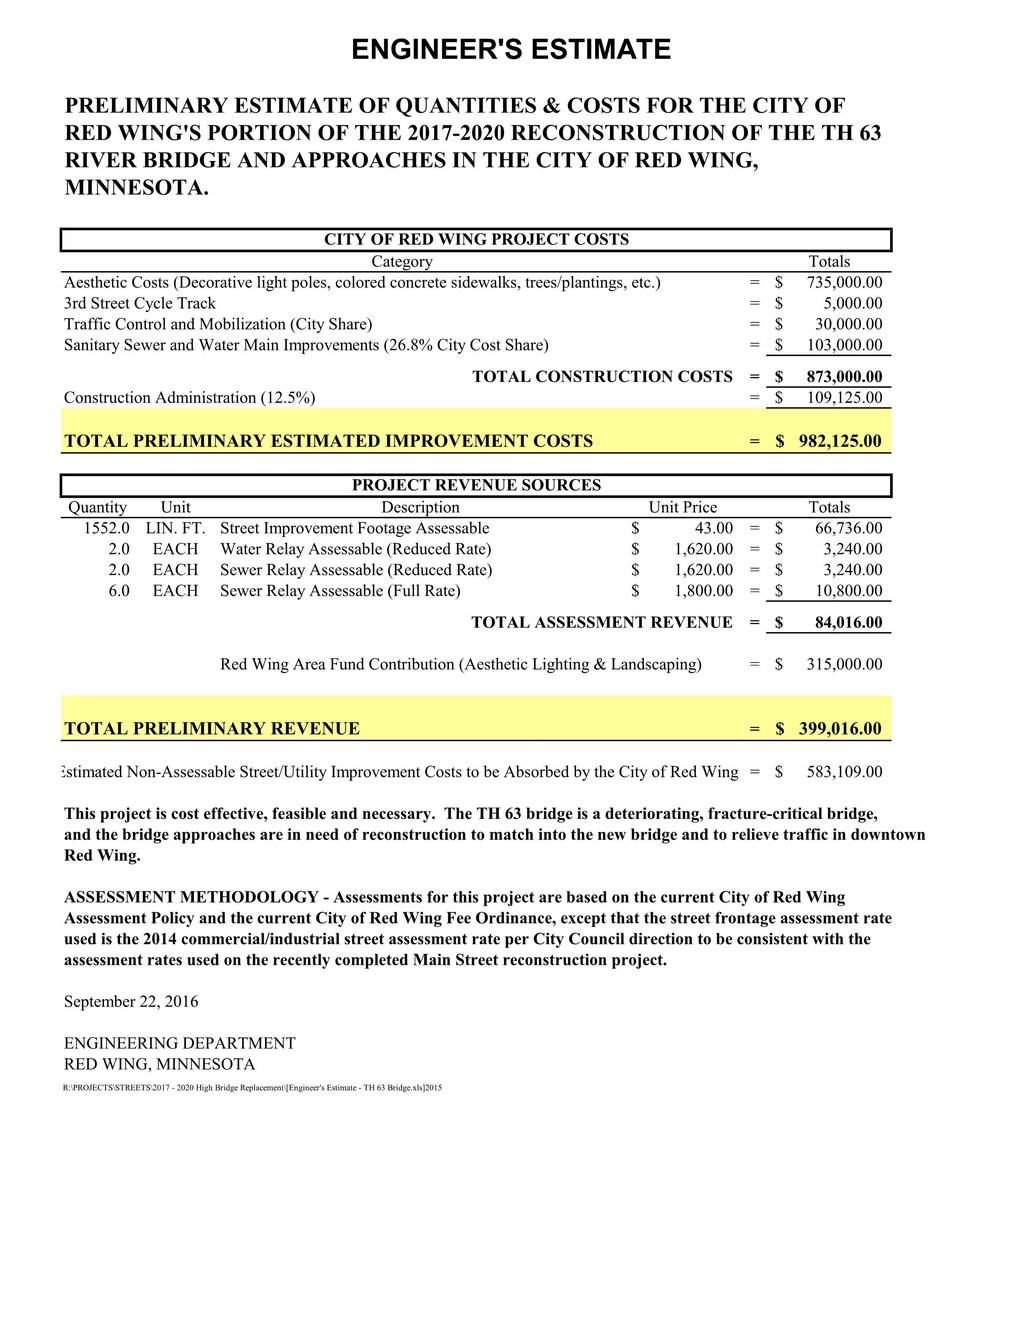 ENGINEER' S ESTIMATE PRELIMINARY ESTIMATE OF QUANTITIES & COSTS FOR THE CITY OF RED WING' S PORTION OF THE 2017-2020 RECONSTRUCTION OF THE TH 63 RIVER BRIDGE AND APPROACHES IN THE CITY OF RED WING,